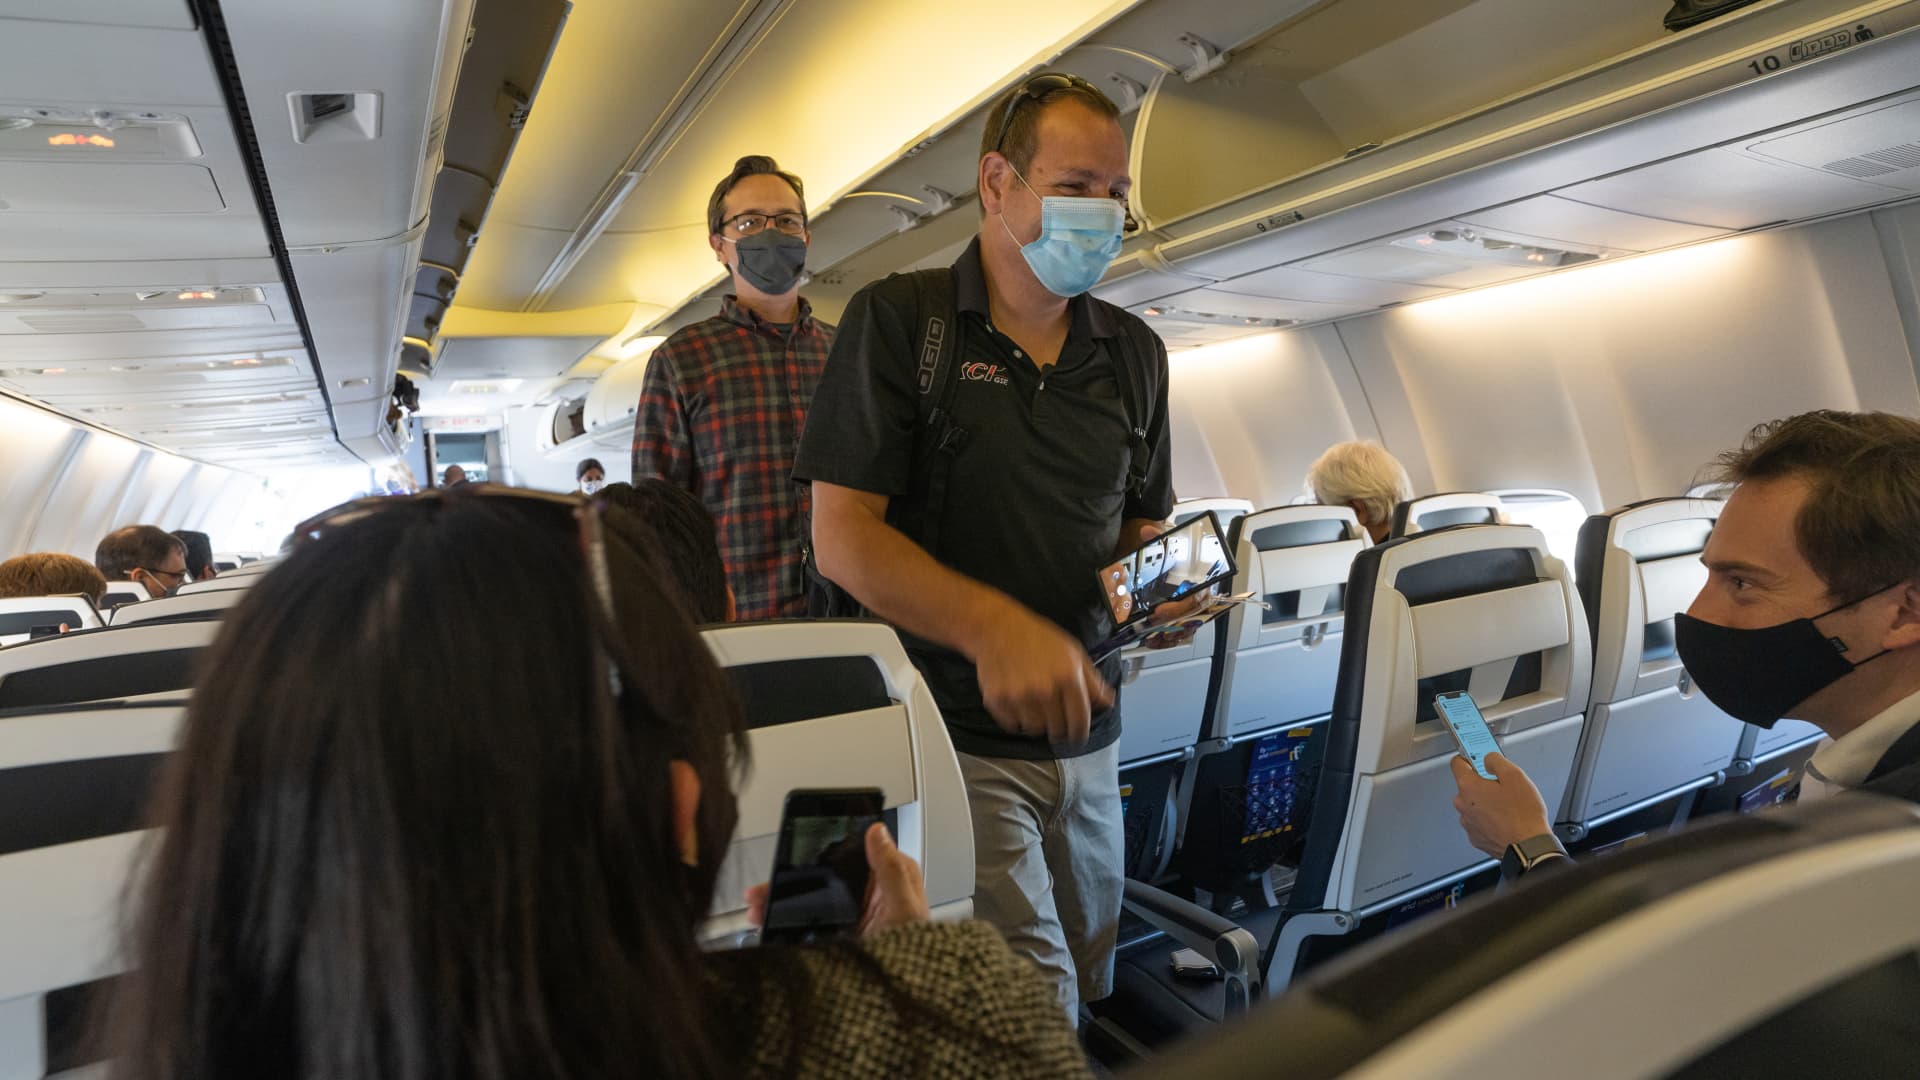 FAA keeps zero tolerance policy for unruly travelers even after judge scraps mask mandate